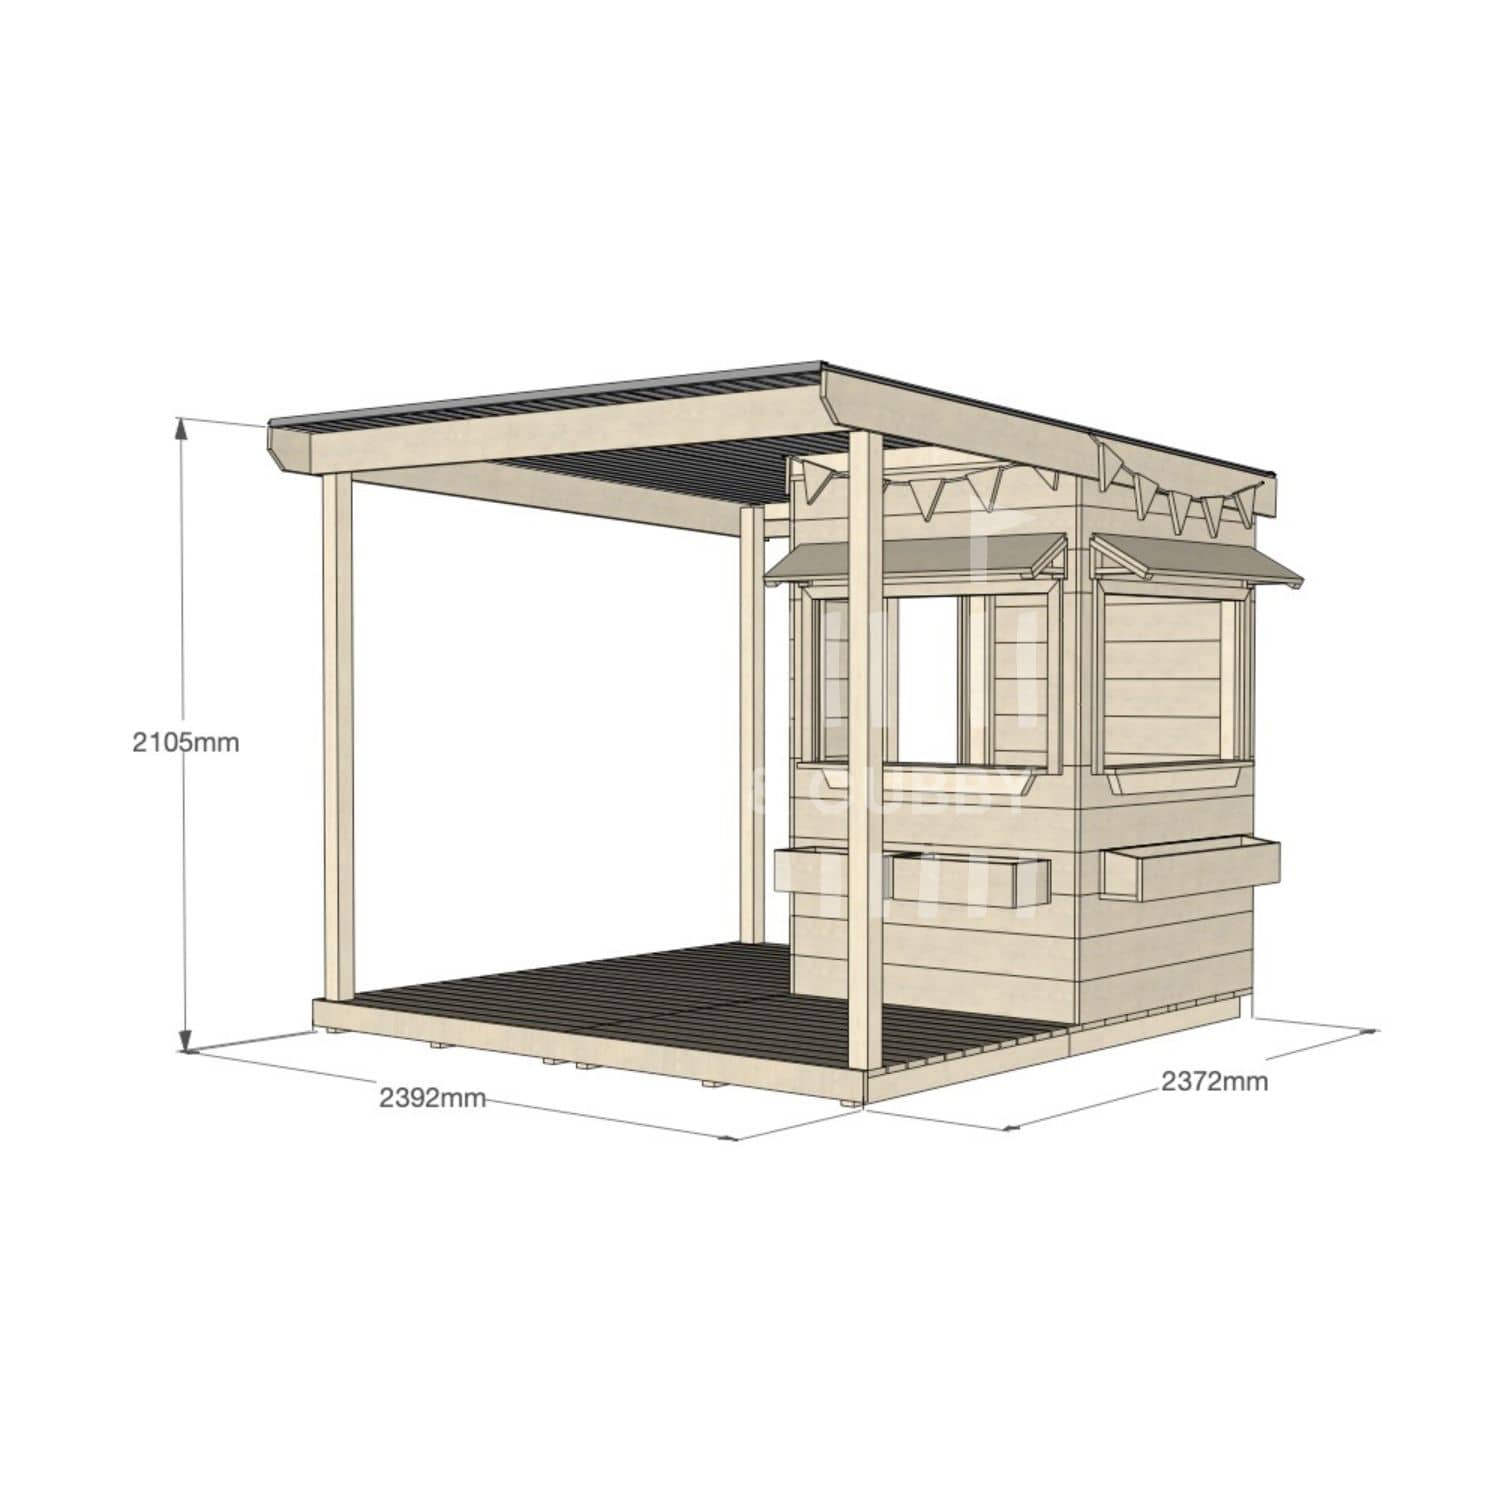 Commercial grade extended height little square pine timber cubby house with wraparound verandah, accessories and dimensions